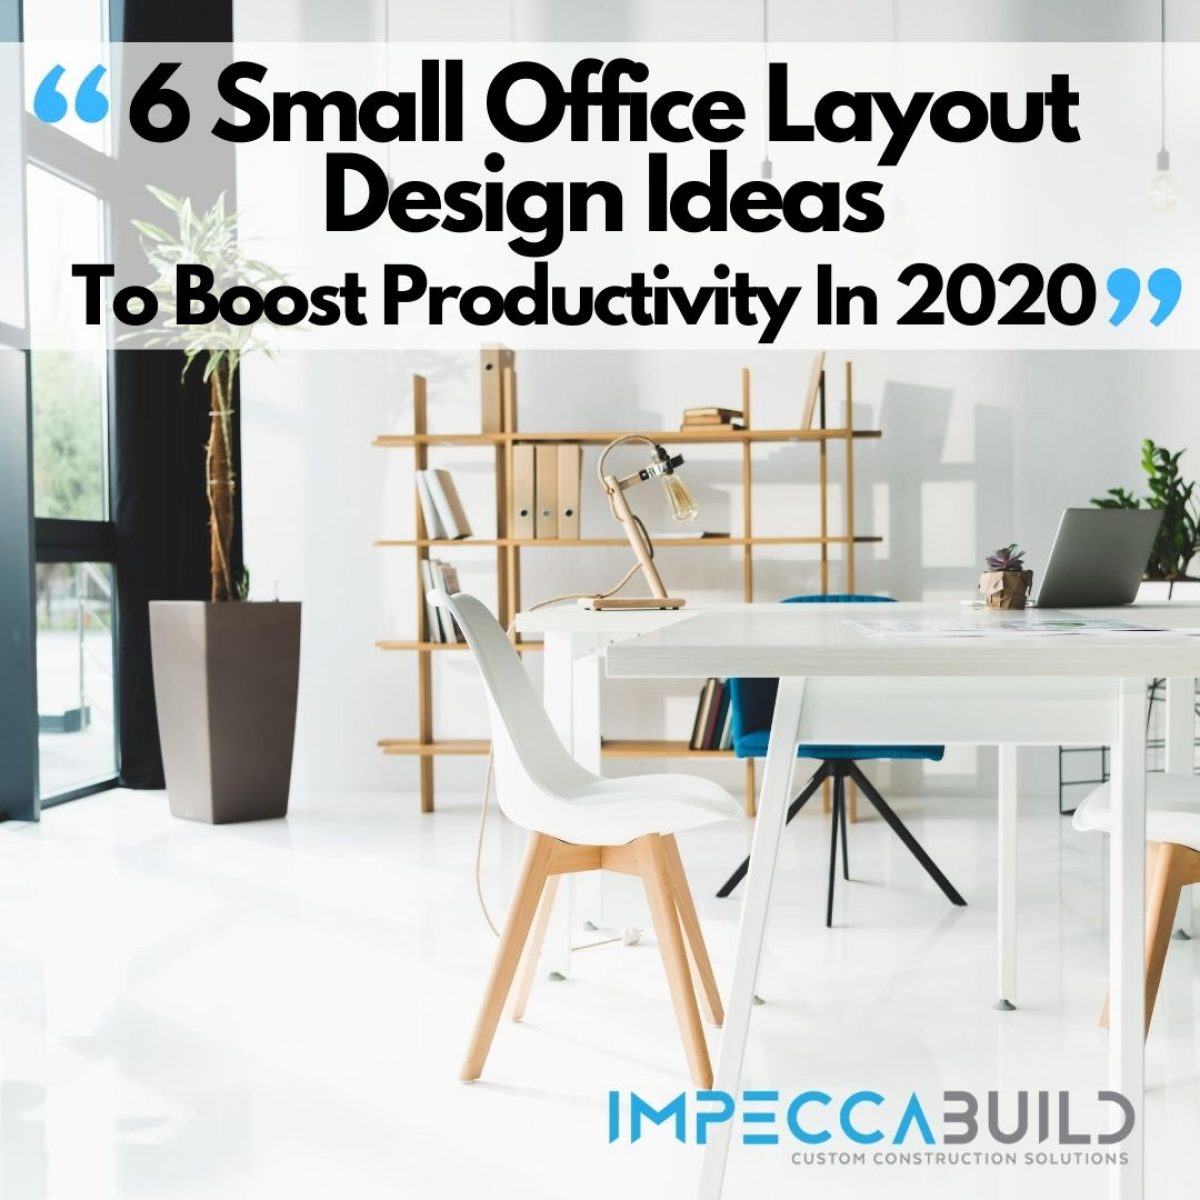 6 Small Office Layout Ideas To Boost Productivity In An Efficient Manner